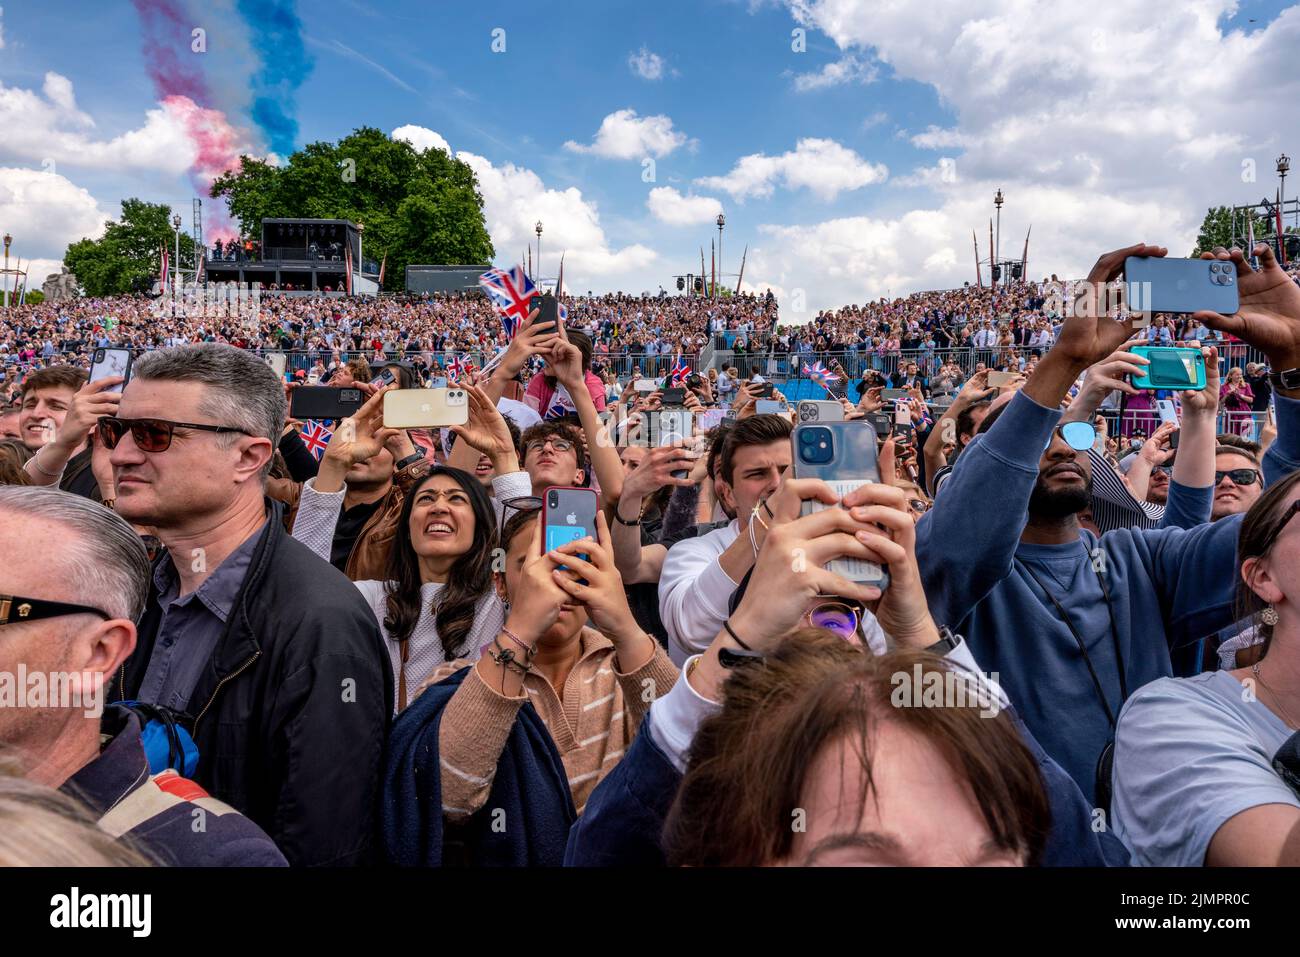 Crowds Of People Watch The Flypast Outside Buckingham Palace During The Queen's Platinum Jubilee Celebrations, London, UK. Stock Photo